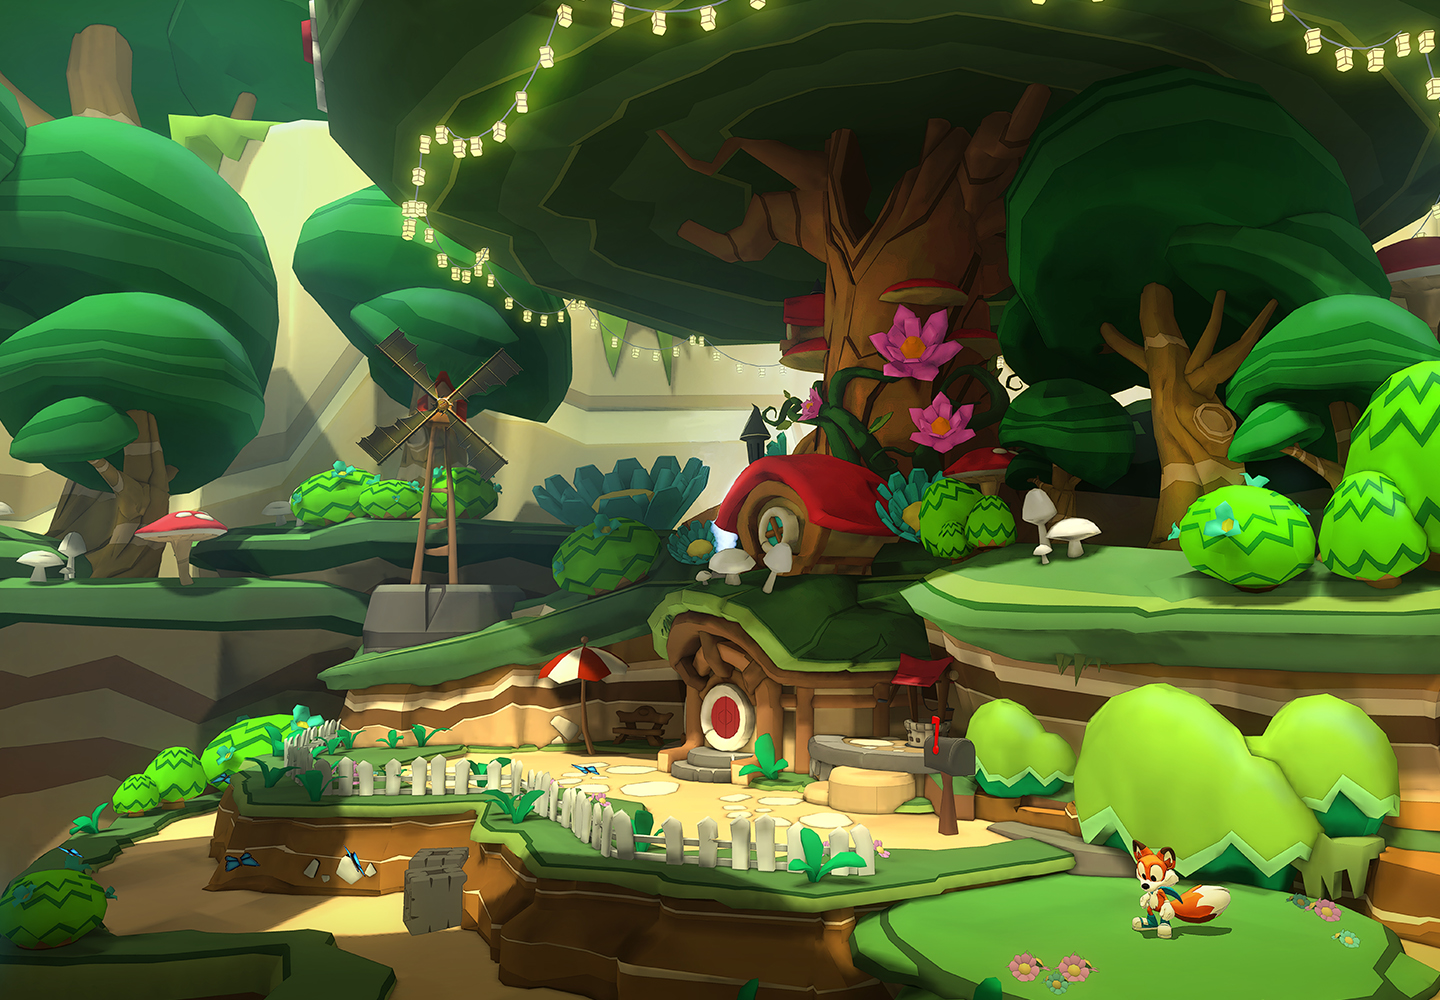 Media asset in full size related to 3dfxzone.it news item entitled as follows: Oculus annuncia che il game Lucky's Tale sar incluso nel bundle di Rift | Image Name: news23573_Lucky-s-Tale-Screenshot_1.jpg